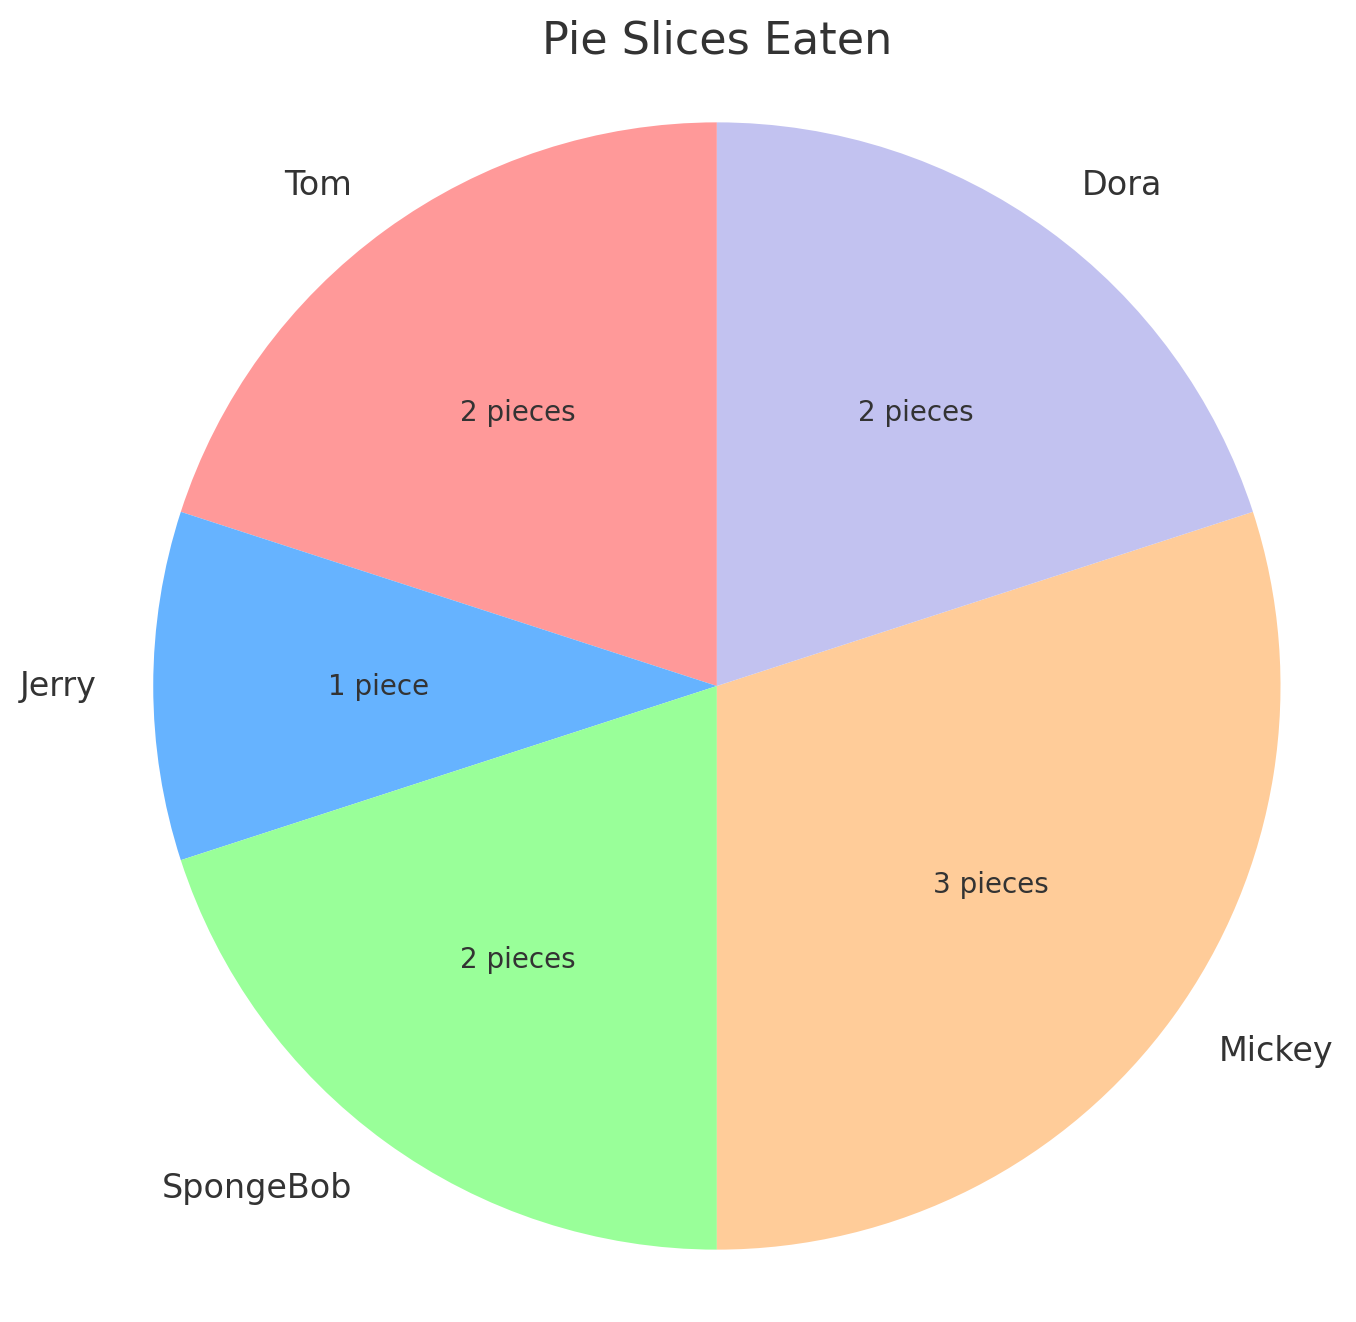 Pie chart in ChatGPT of pie slices eaten by different characters